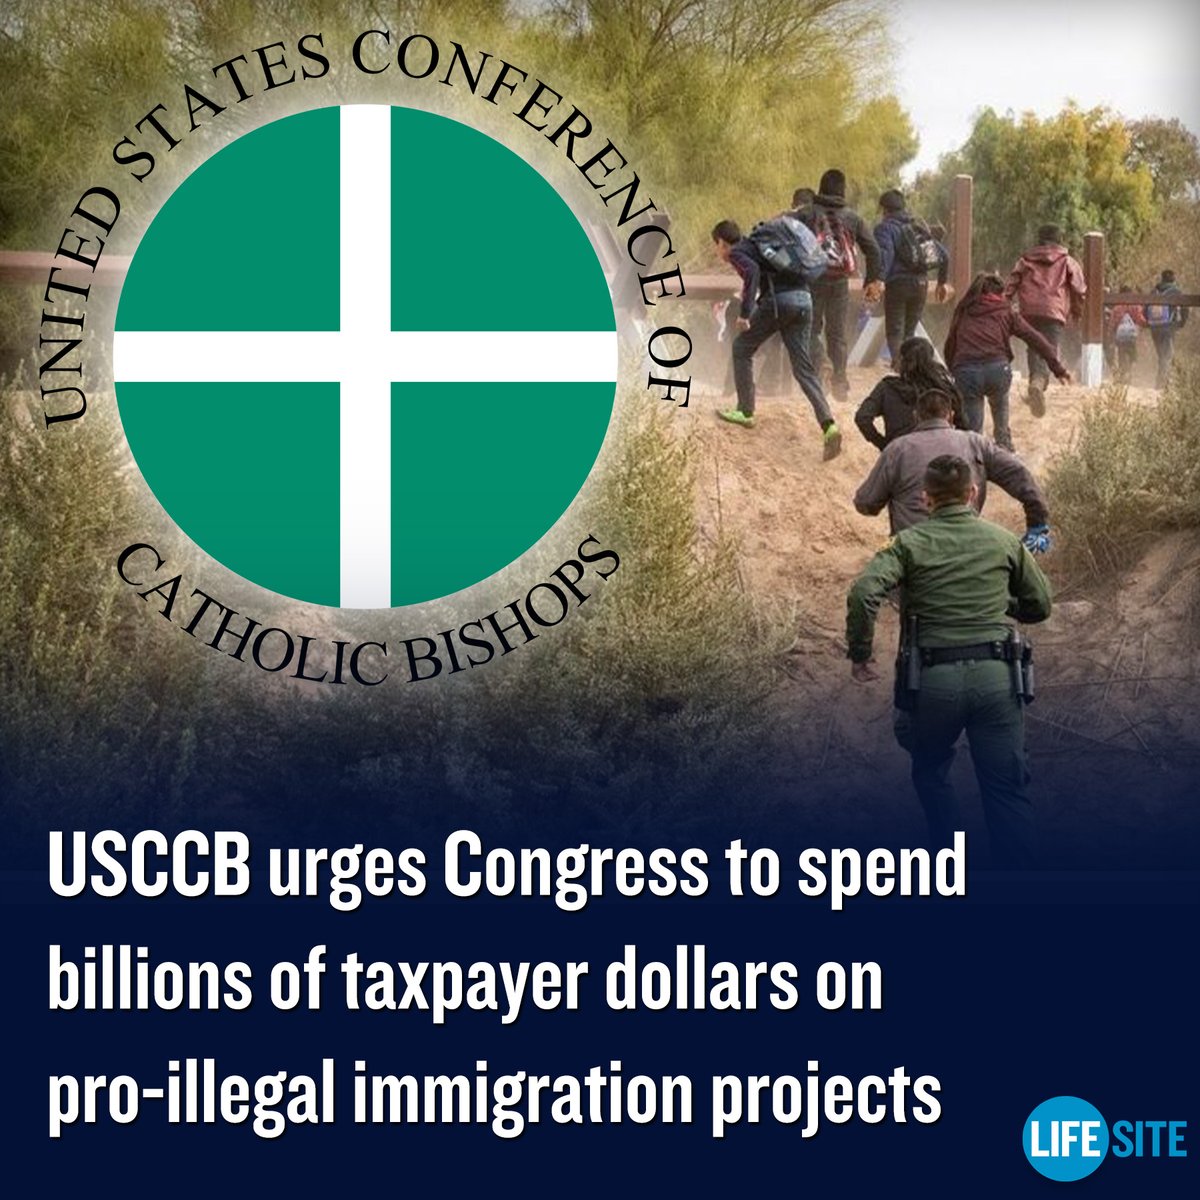 The @USCCB's migration committee chairman, left-wing Bishop Mark Seitz, called on Congress to spend more than $20 billion on initiatives and to ‘reject measures that further restrict access to asylum.’ MORE: lifesitenews.com/news/usccb-urg… #CatholicX #Catholic #Congress #Immigration